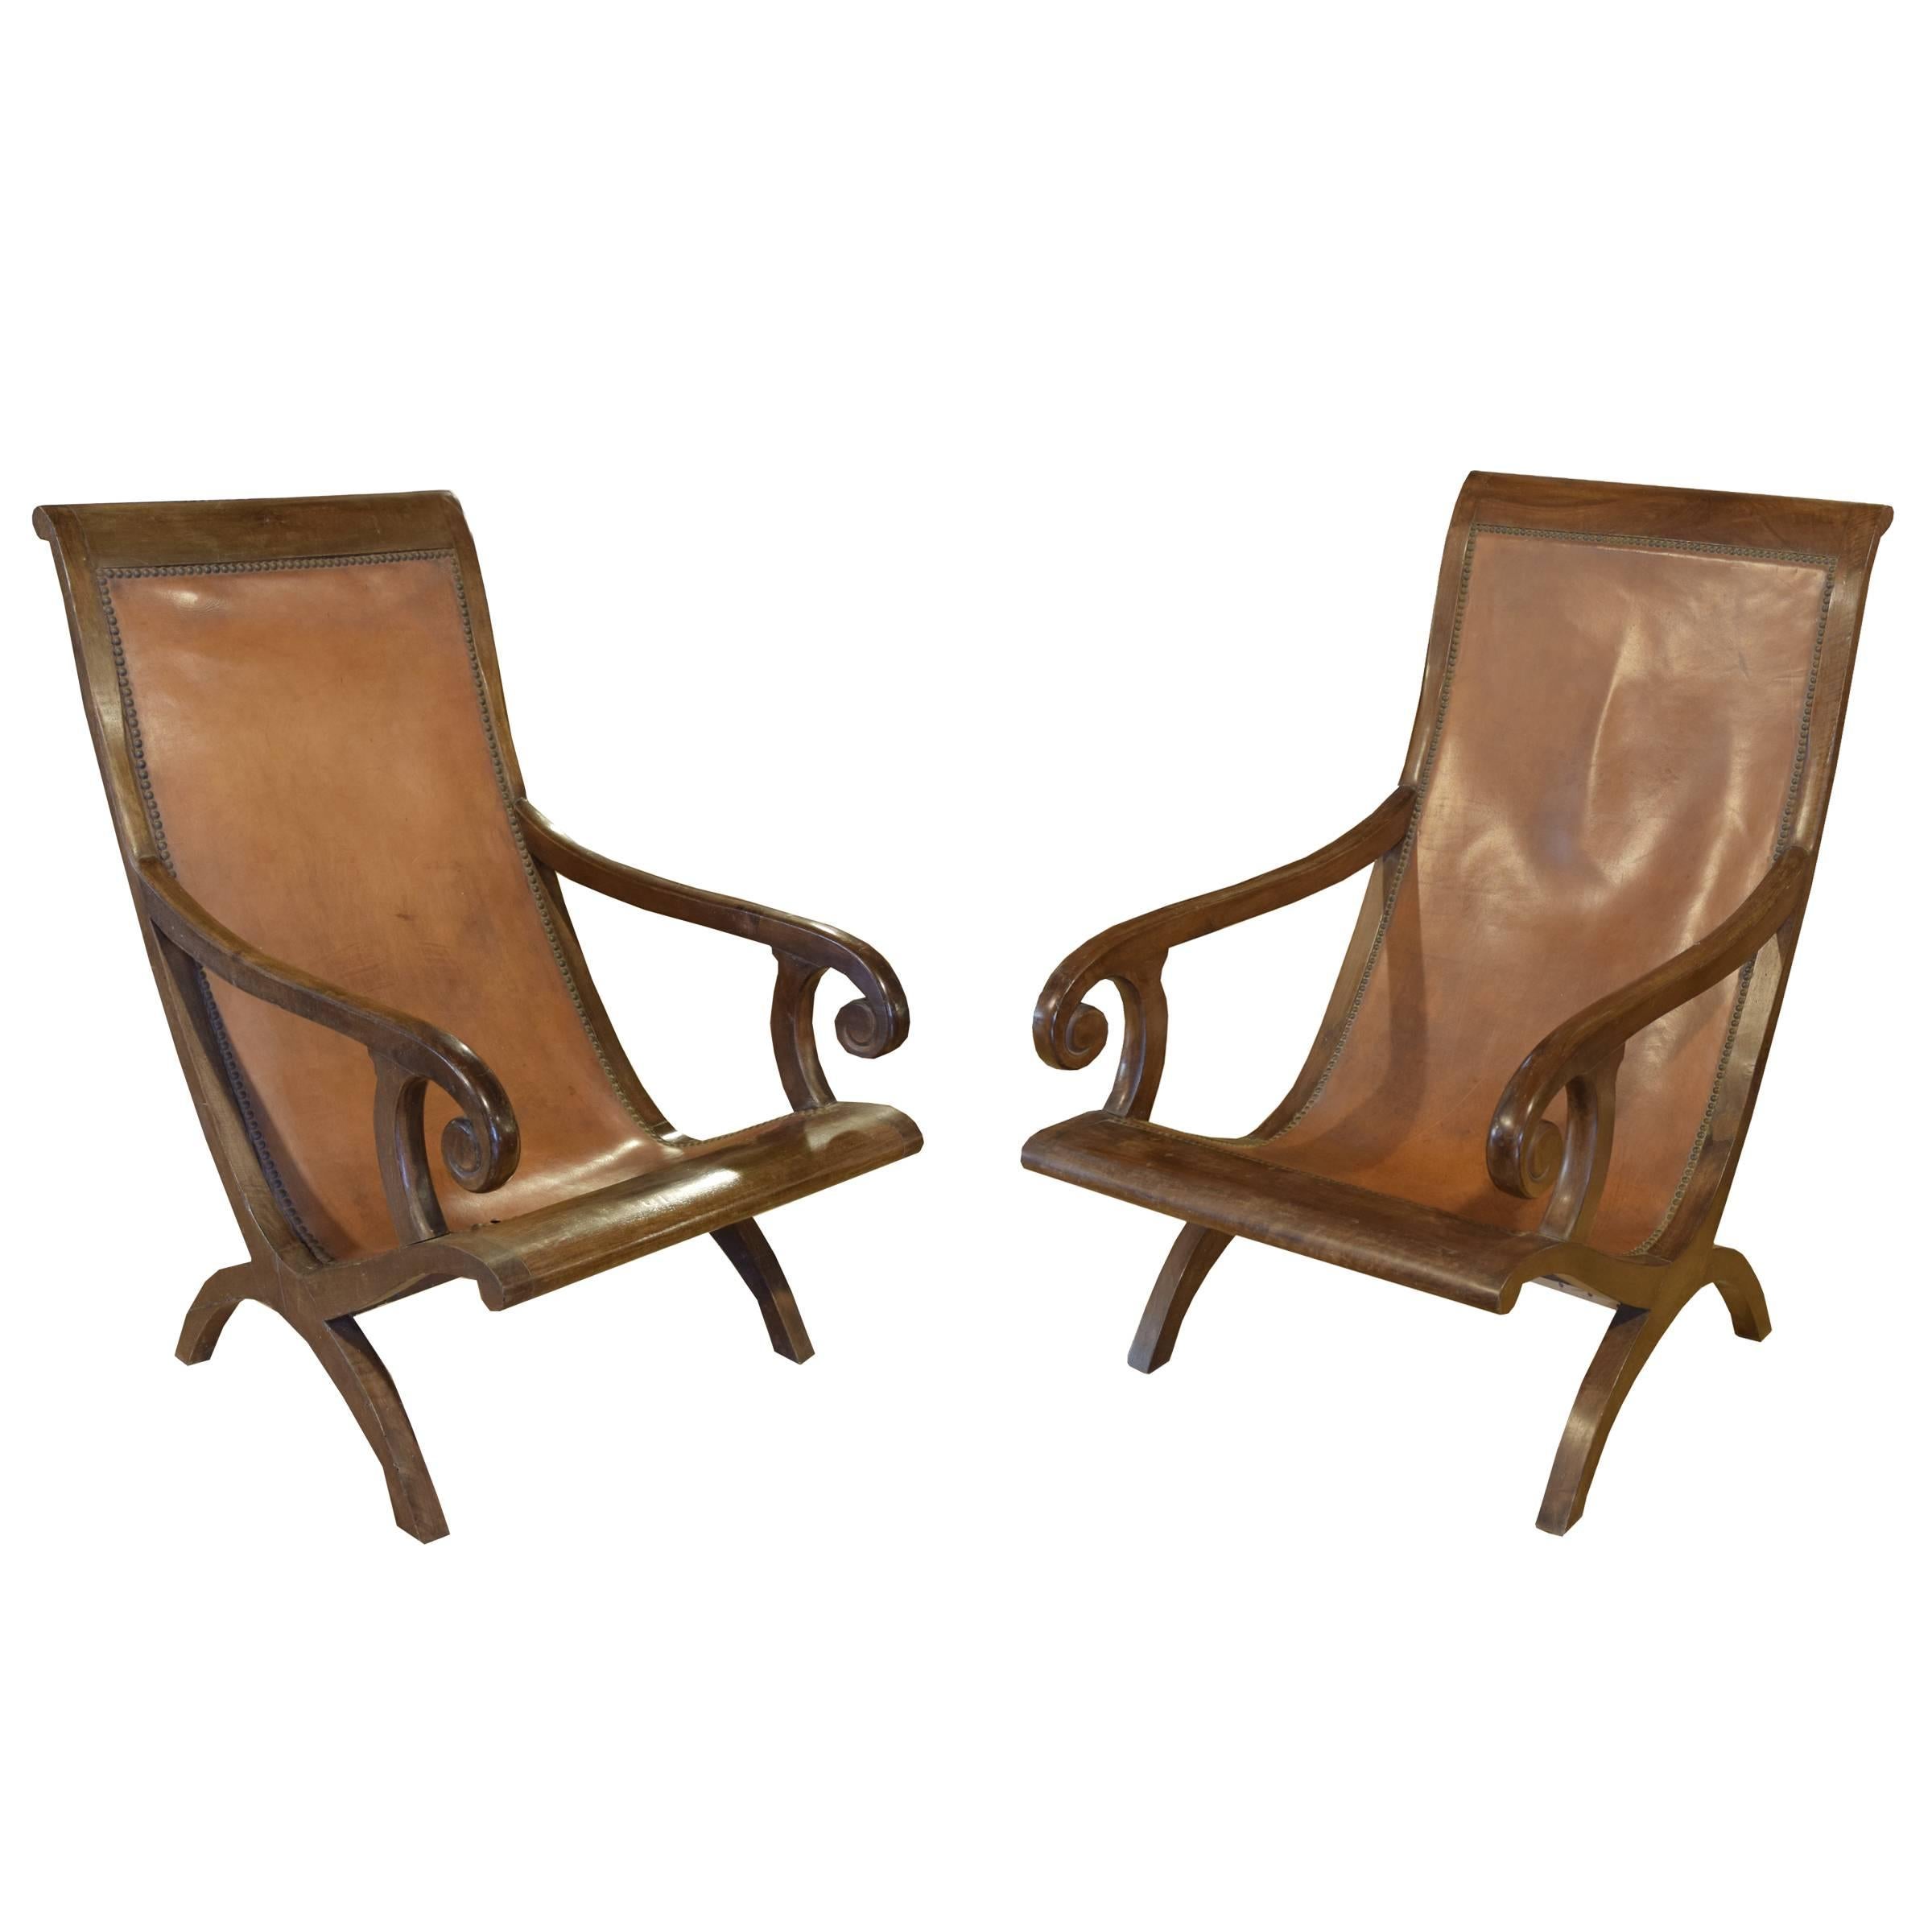 Pair of French Campeche Style Chairs